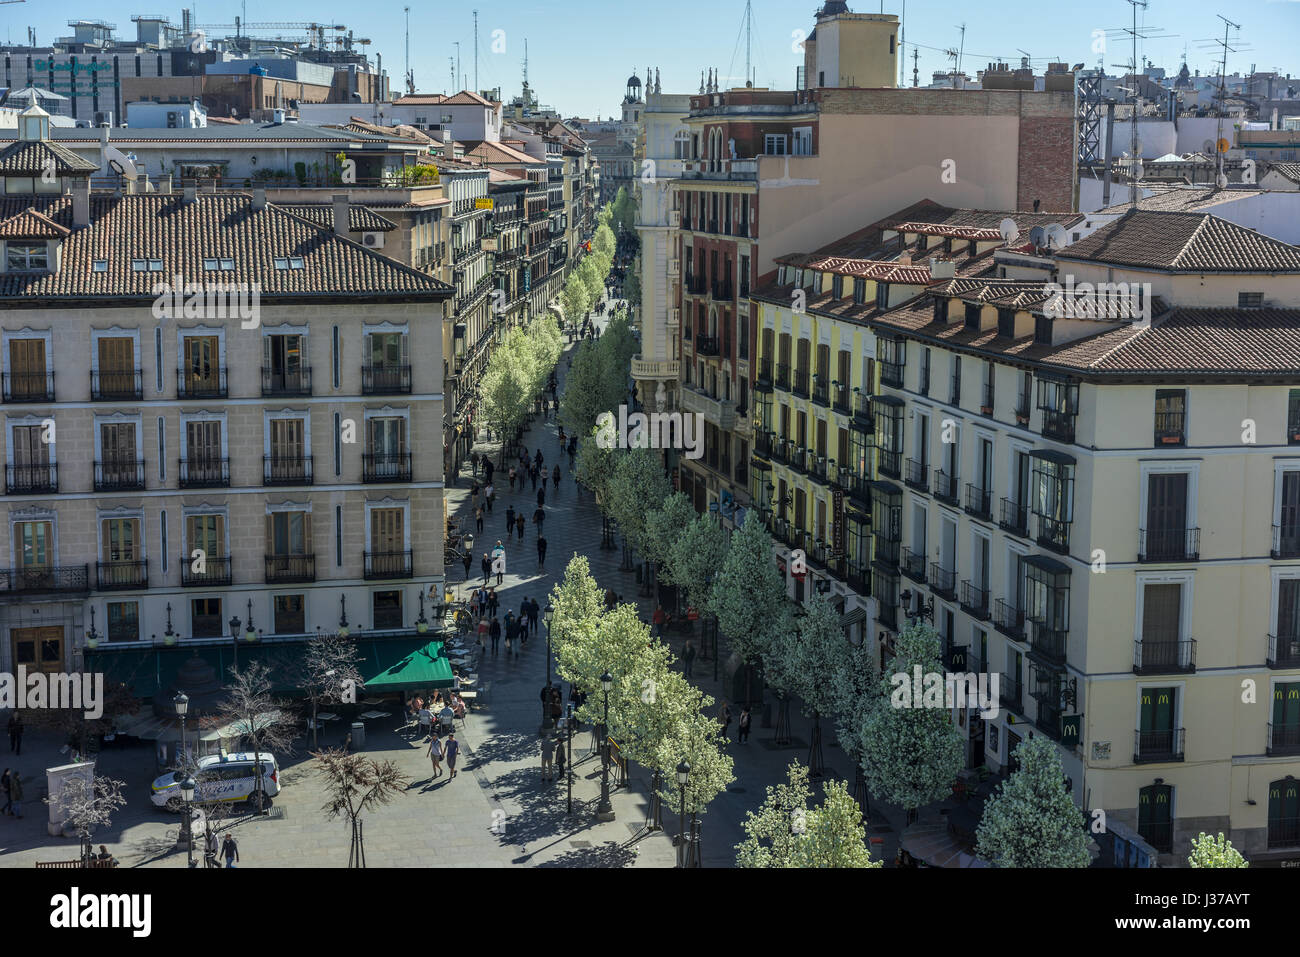 Blooming cherry trees from Plaza de Isabel II along Arenal street (Calle del Arenal) to Puerta del Sol square and clock tower, Madrid Spain Stock Photo